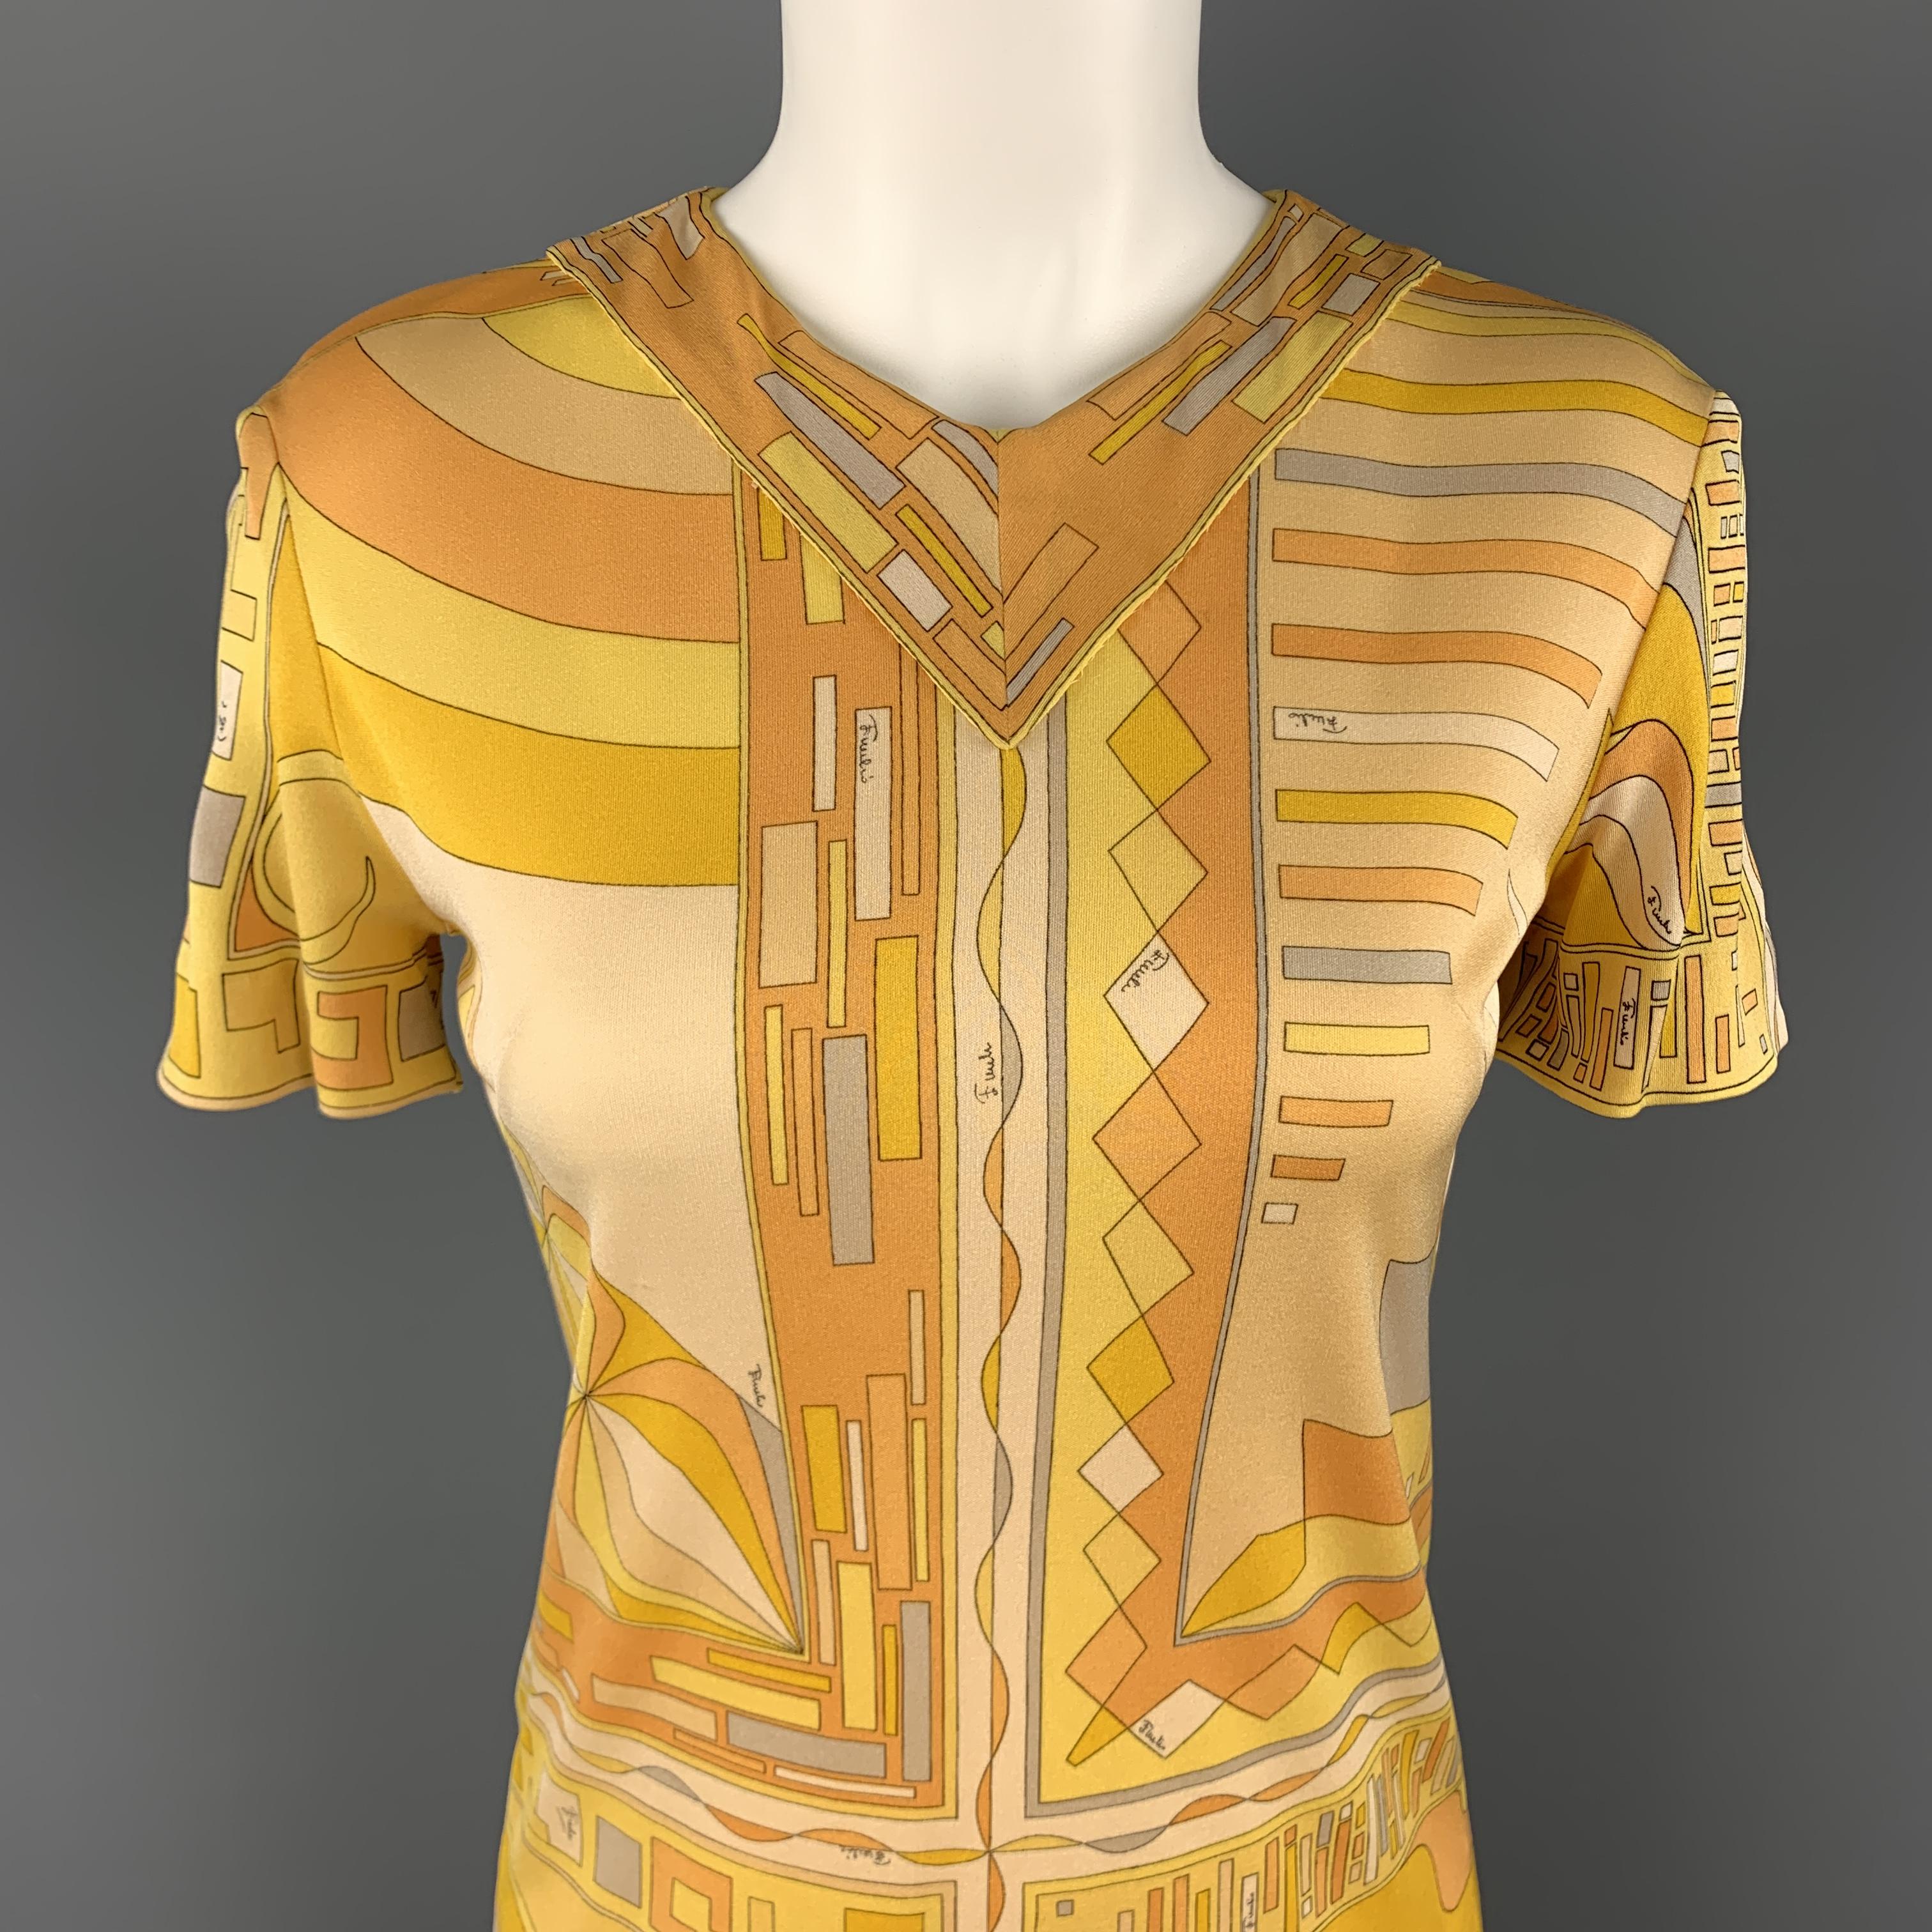 Vintage EMILIO PUCCI shift dress comes in light weight silk jersey with a V neck, short sleeves, and al over signature print. Made in Italy.

Very Good Pre-Owned Condition.
Marked: 6

Measurements:

Shoulder: 16 in.
Bust: 35 in.
Waist: 32 in.
Hip: